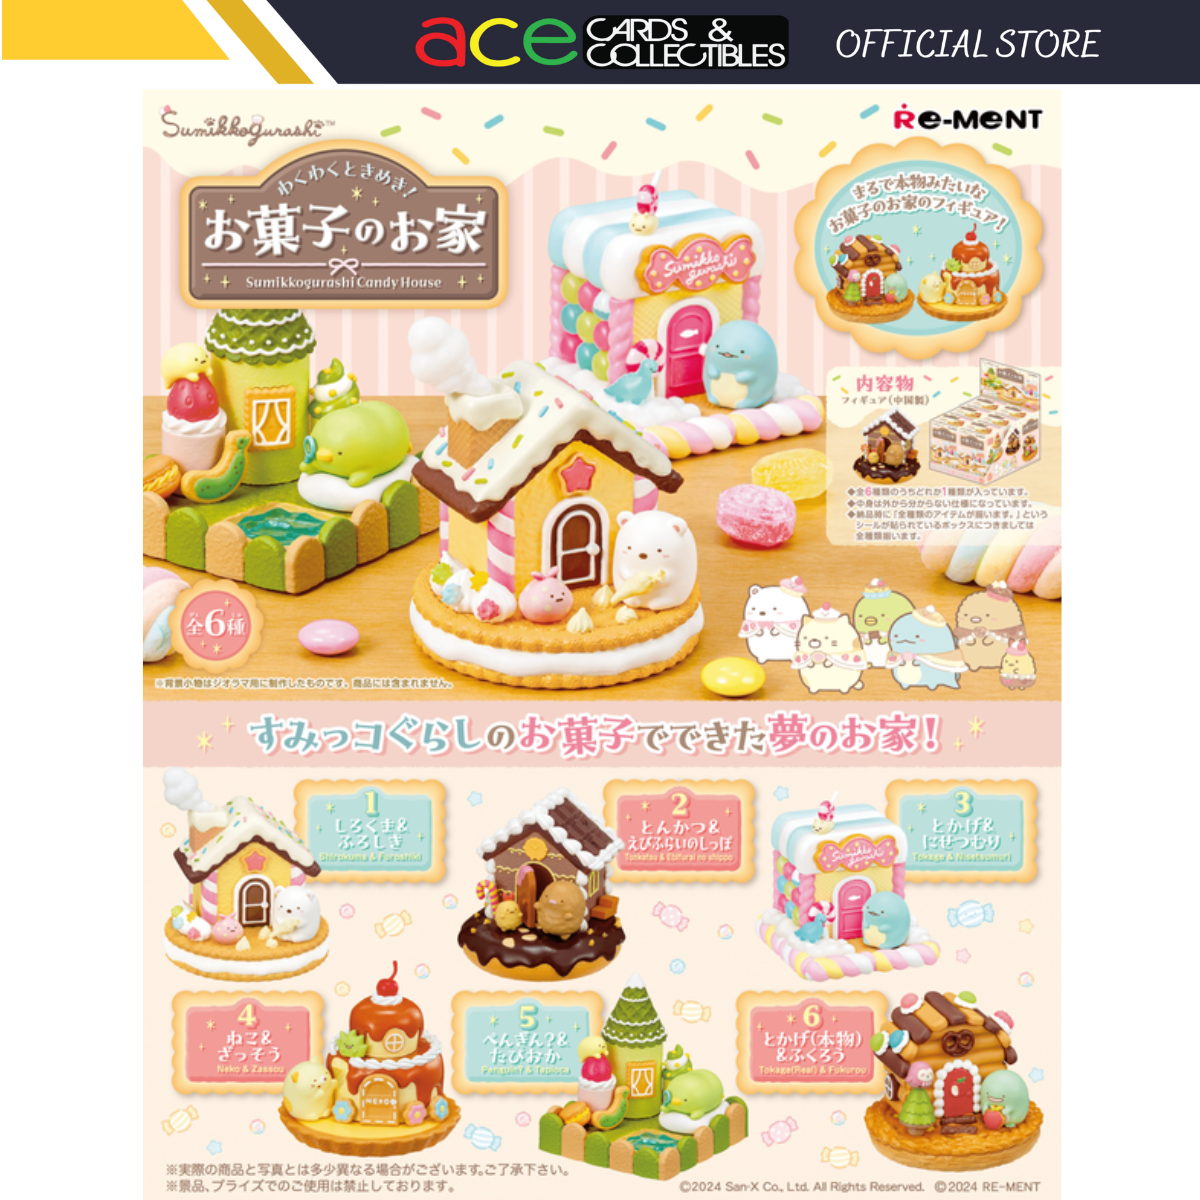 Re-Ment Sumikko Candy House-Complete Set of 6-Re-Ment-Ace Cards &amp; Collectibles